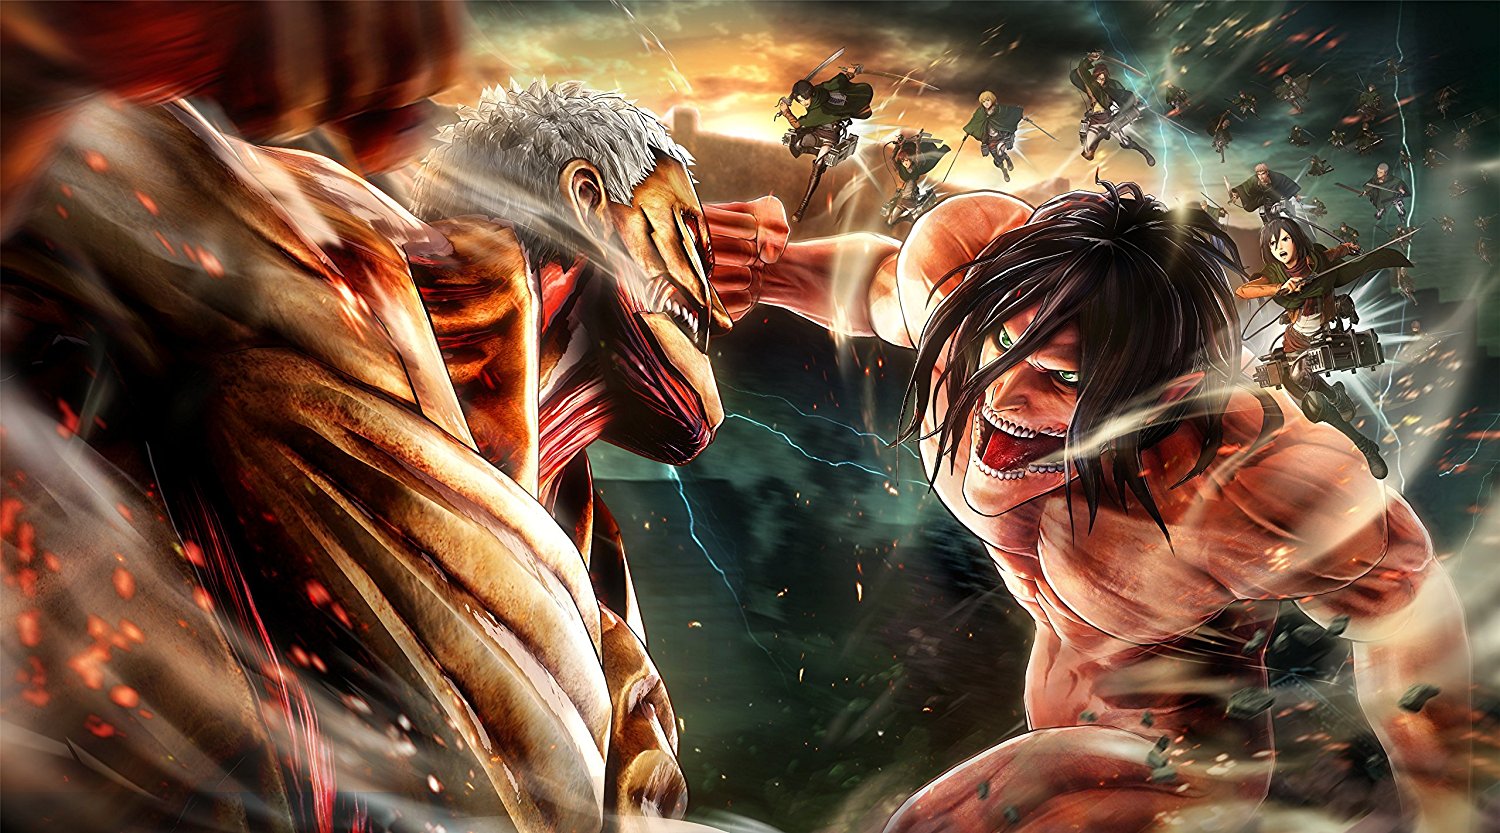 Attack on Titan 2 video shows Eren in their "Civilian Clothes" outfits